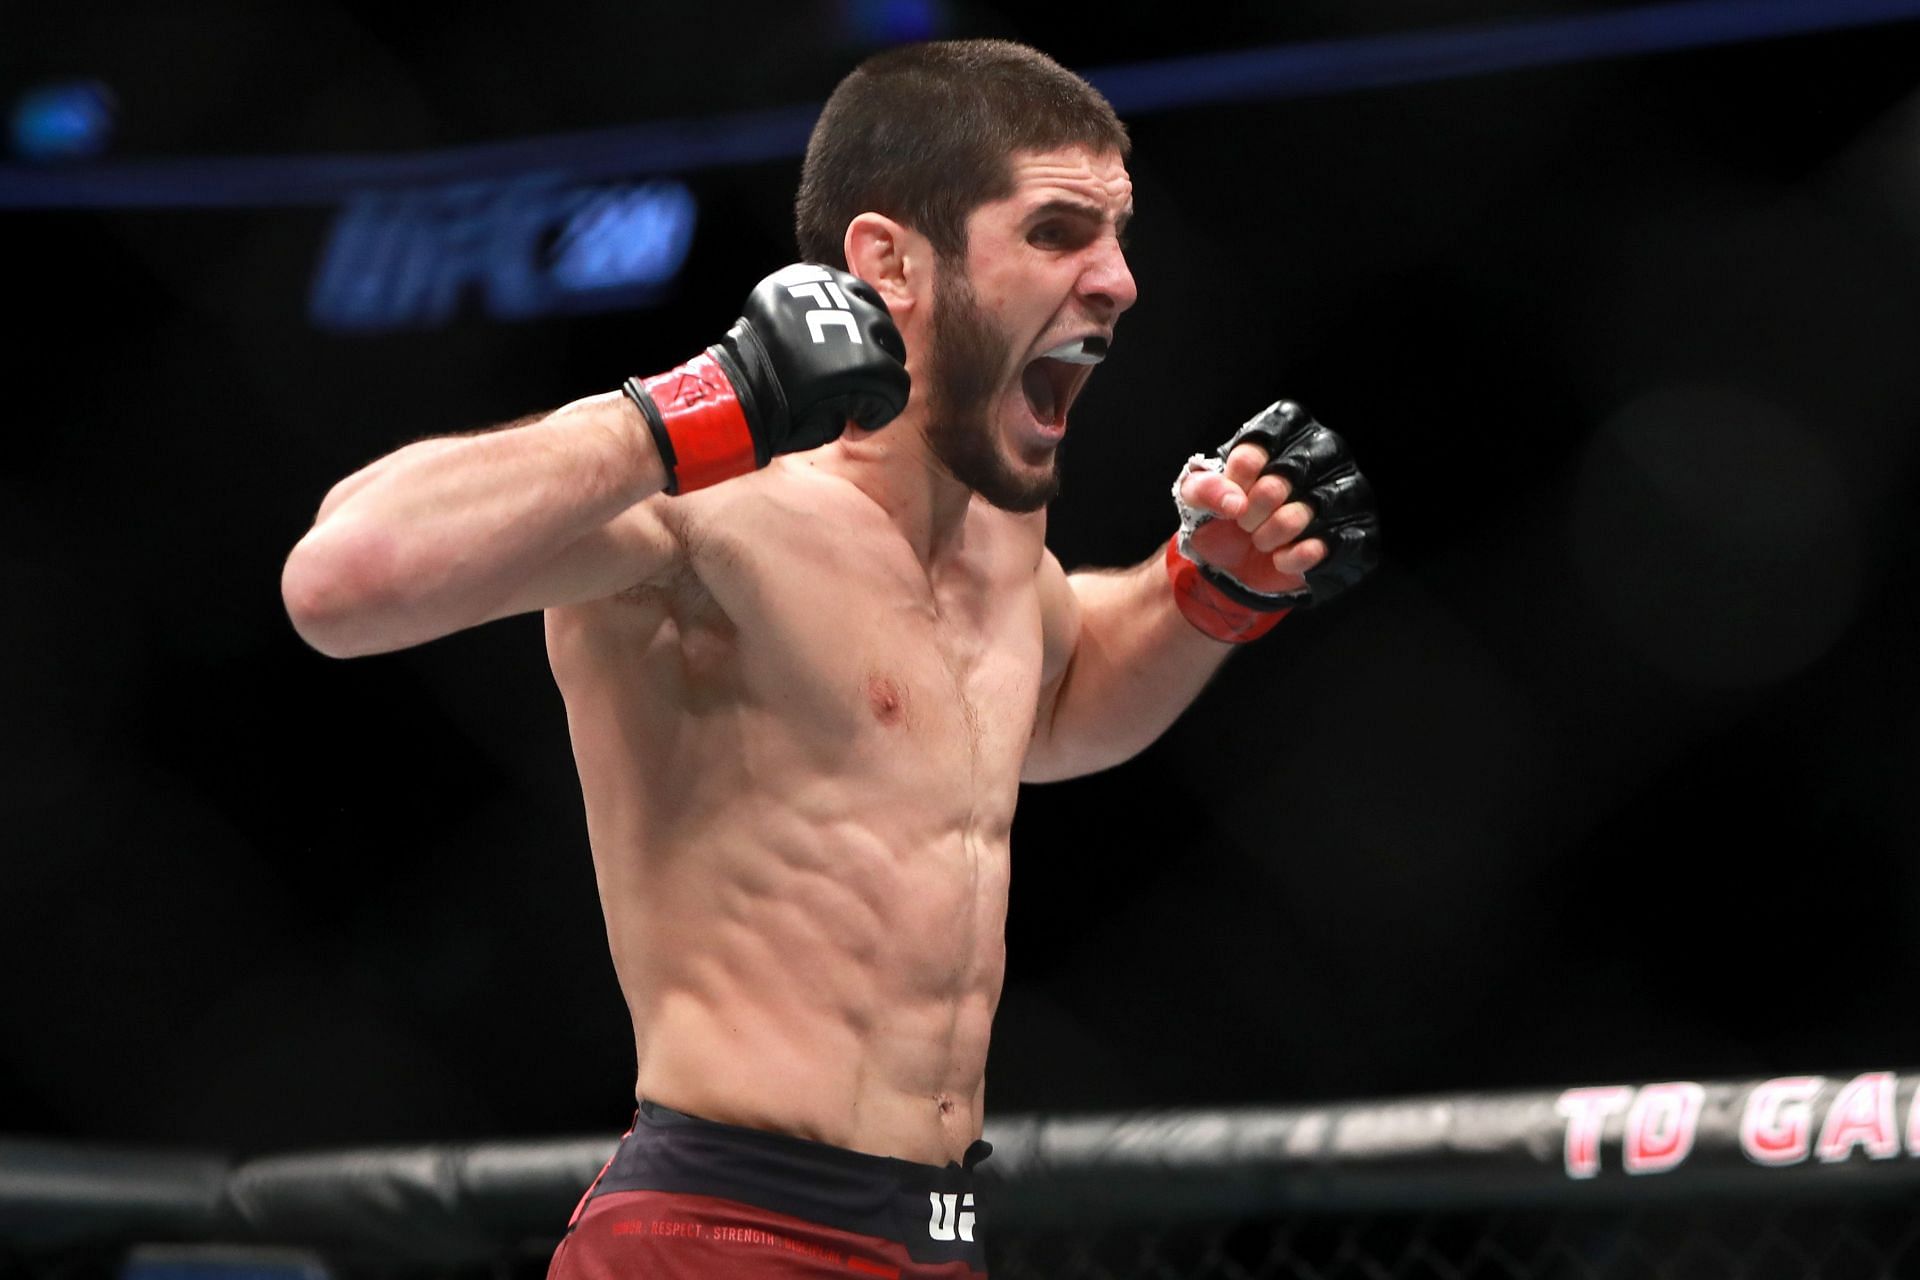 Islam Makhachev had a hard time finding any top fighters to face him.